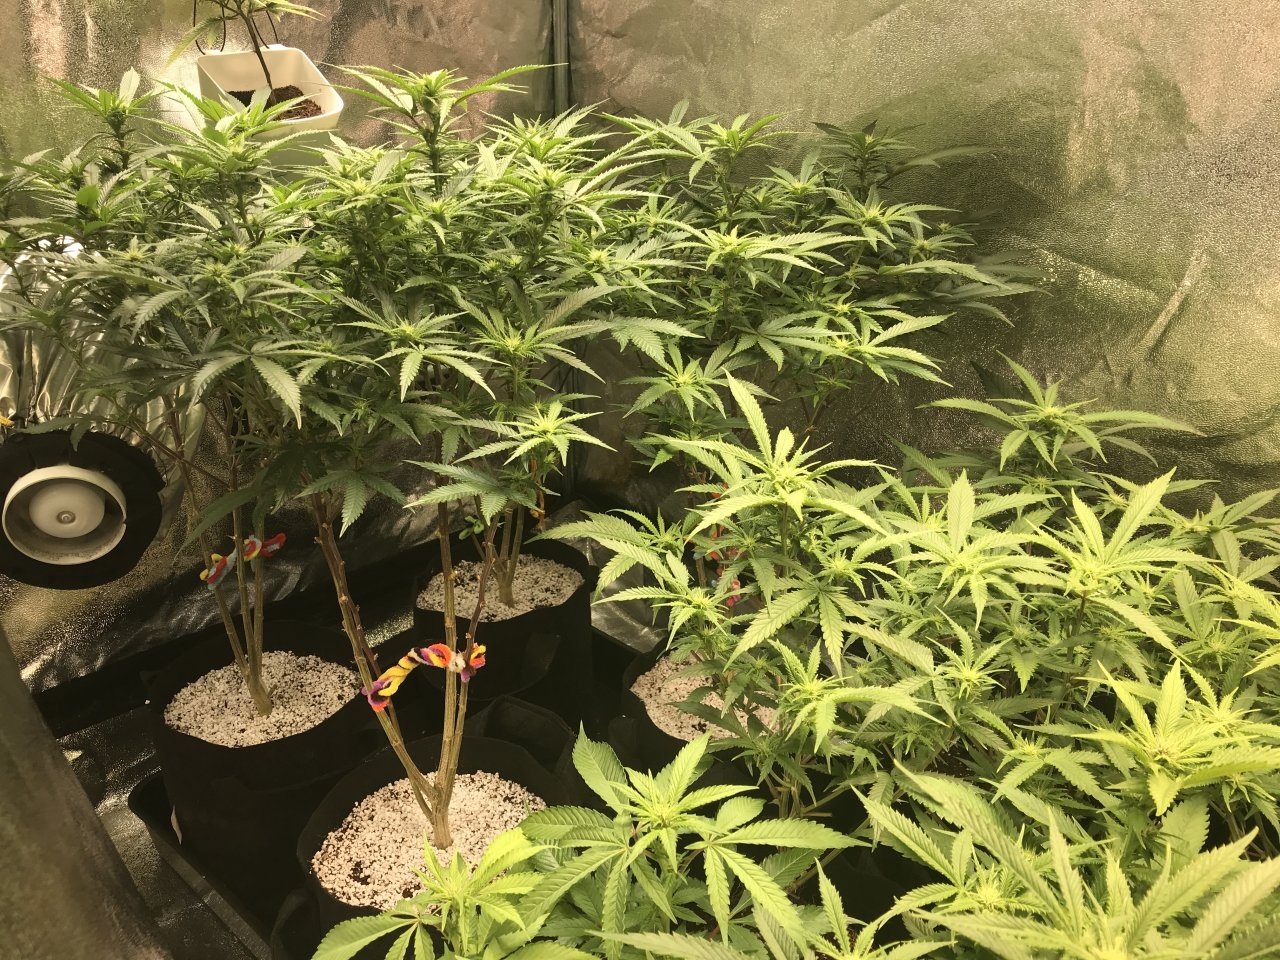 16th Day of 12:12 QuadSide of the Grow 1.JPG